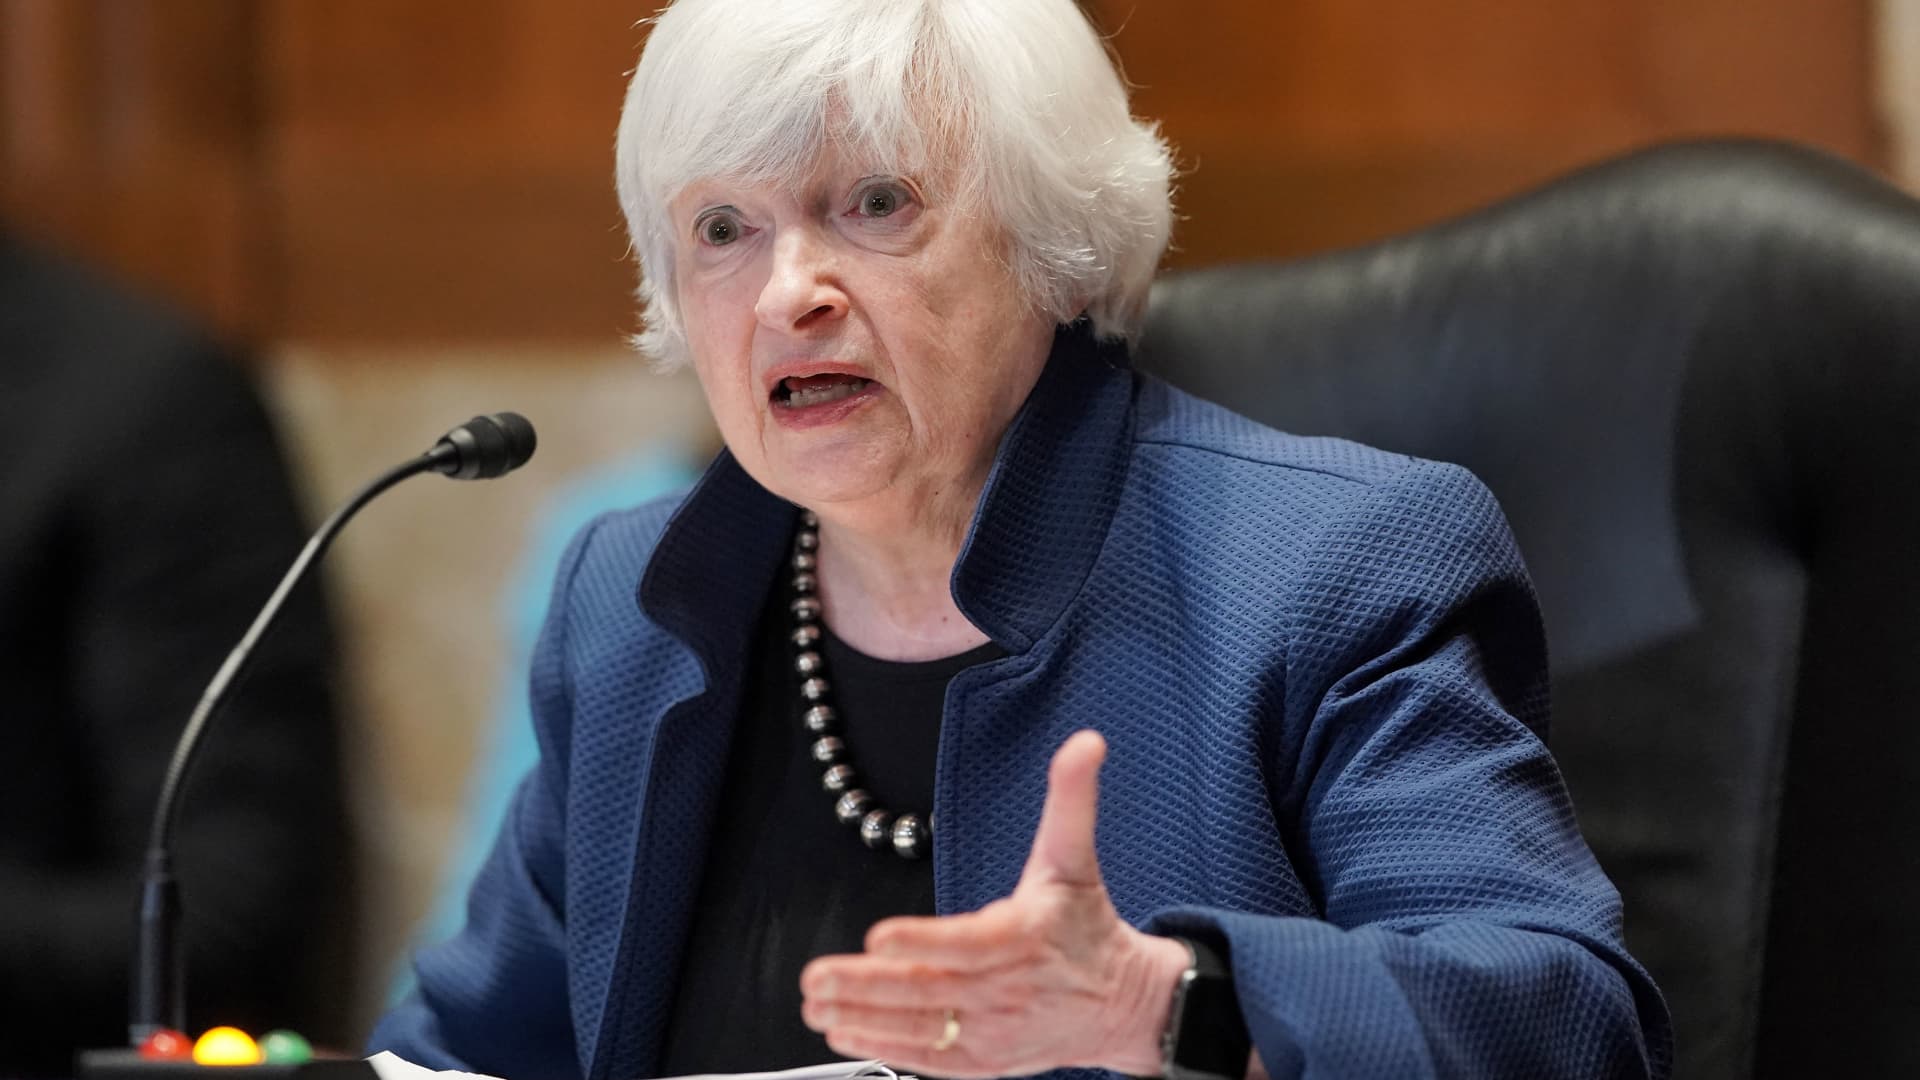 Treasury Secretary Janet Yellen testifies during a Senate Appropriations Subcommittee hearing to examine the FY 2022 budget request for the Treasury Department on June 23, 2021 at the US Capitol in Washington, DC.